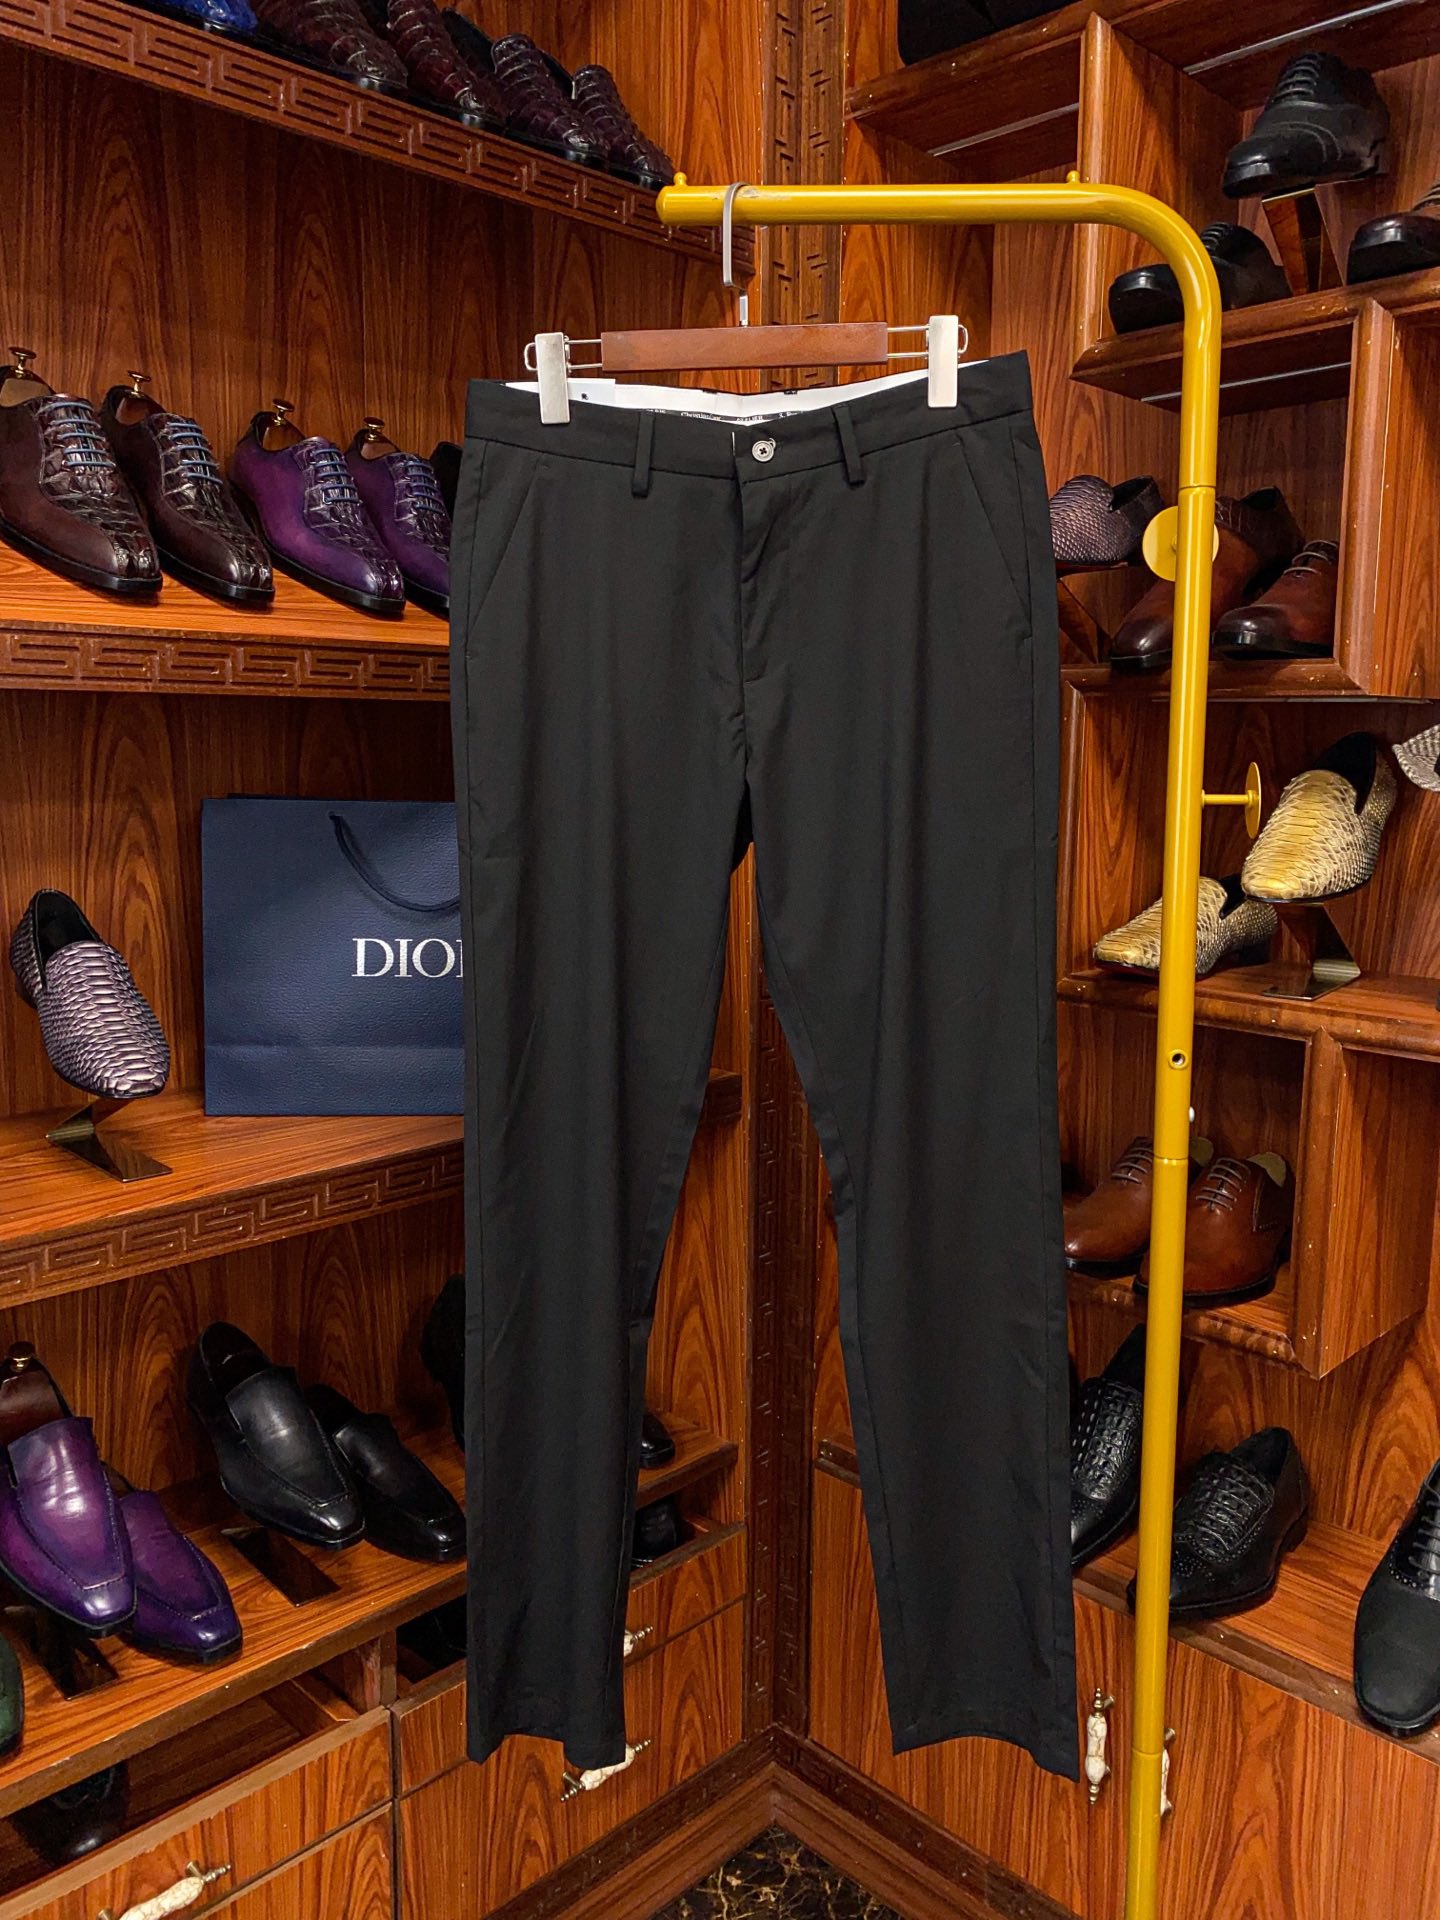 Dior Clothing Pants & Trousers Engraving Cotton Spring/Summer Collection Fashion Casual